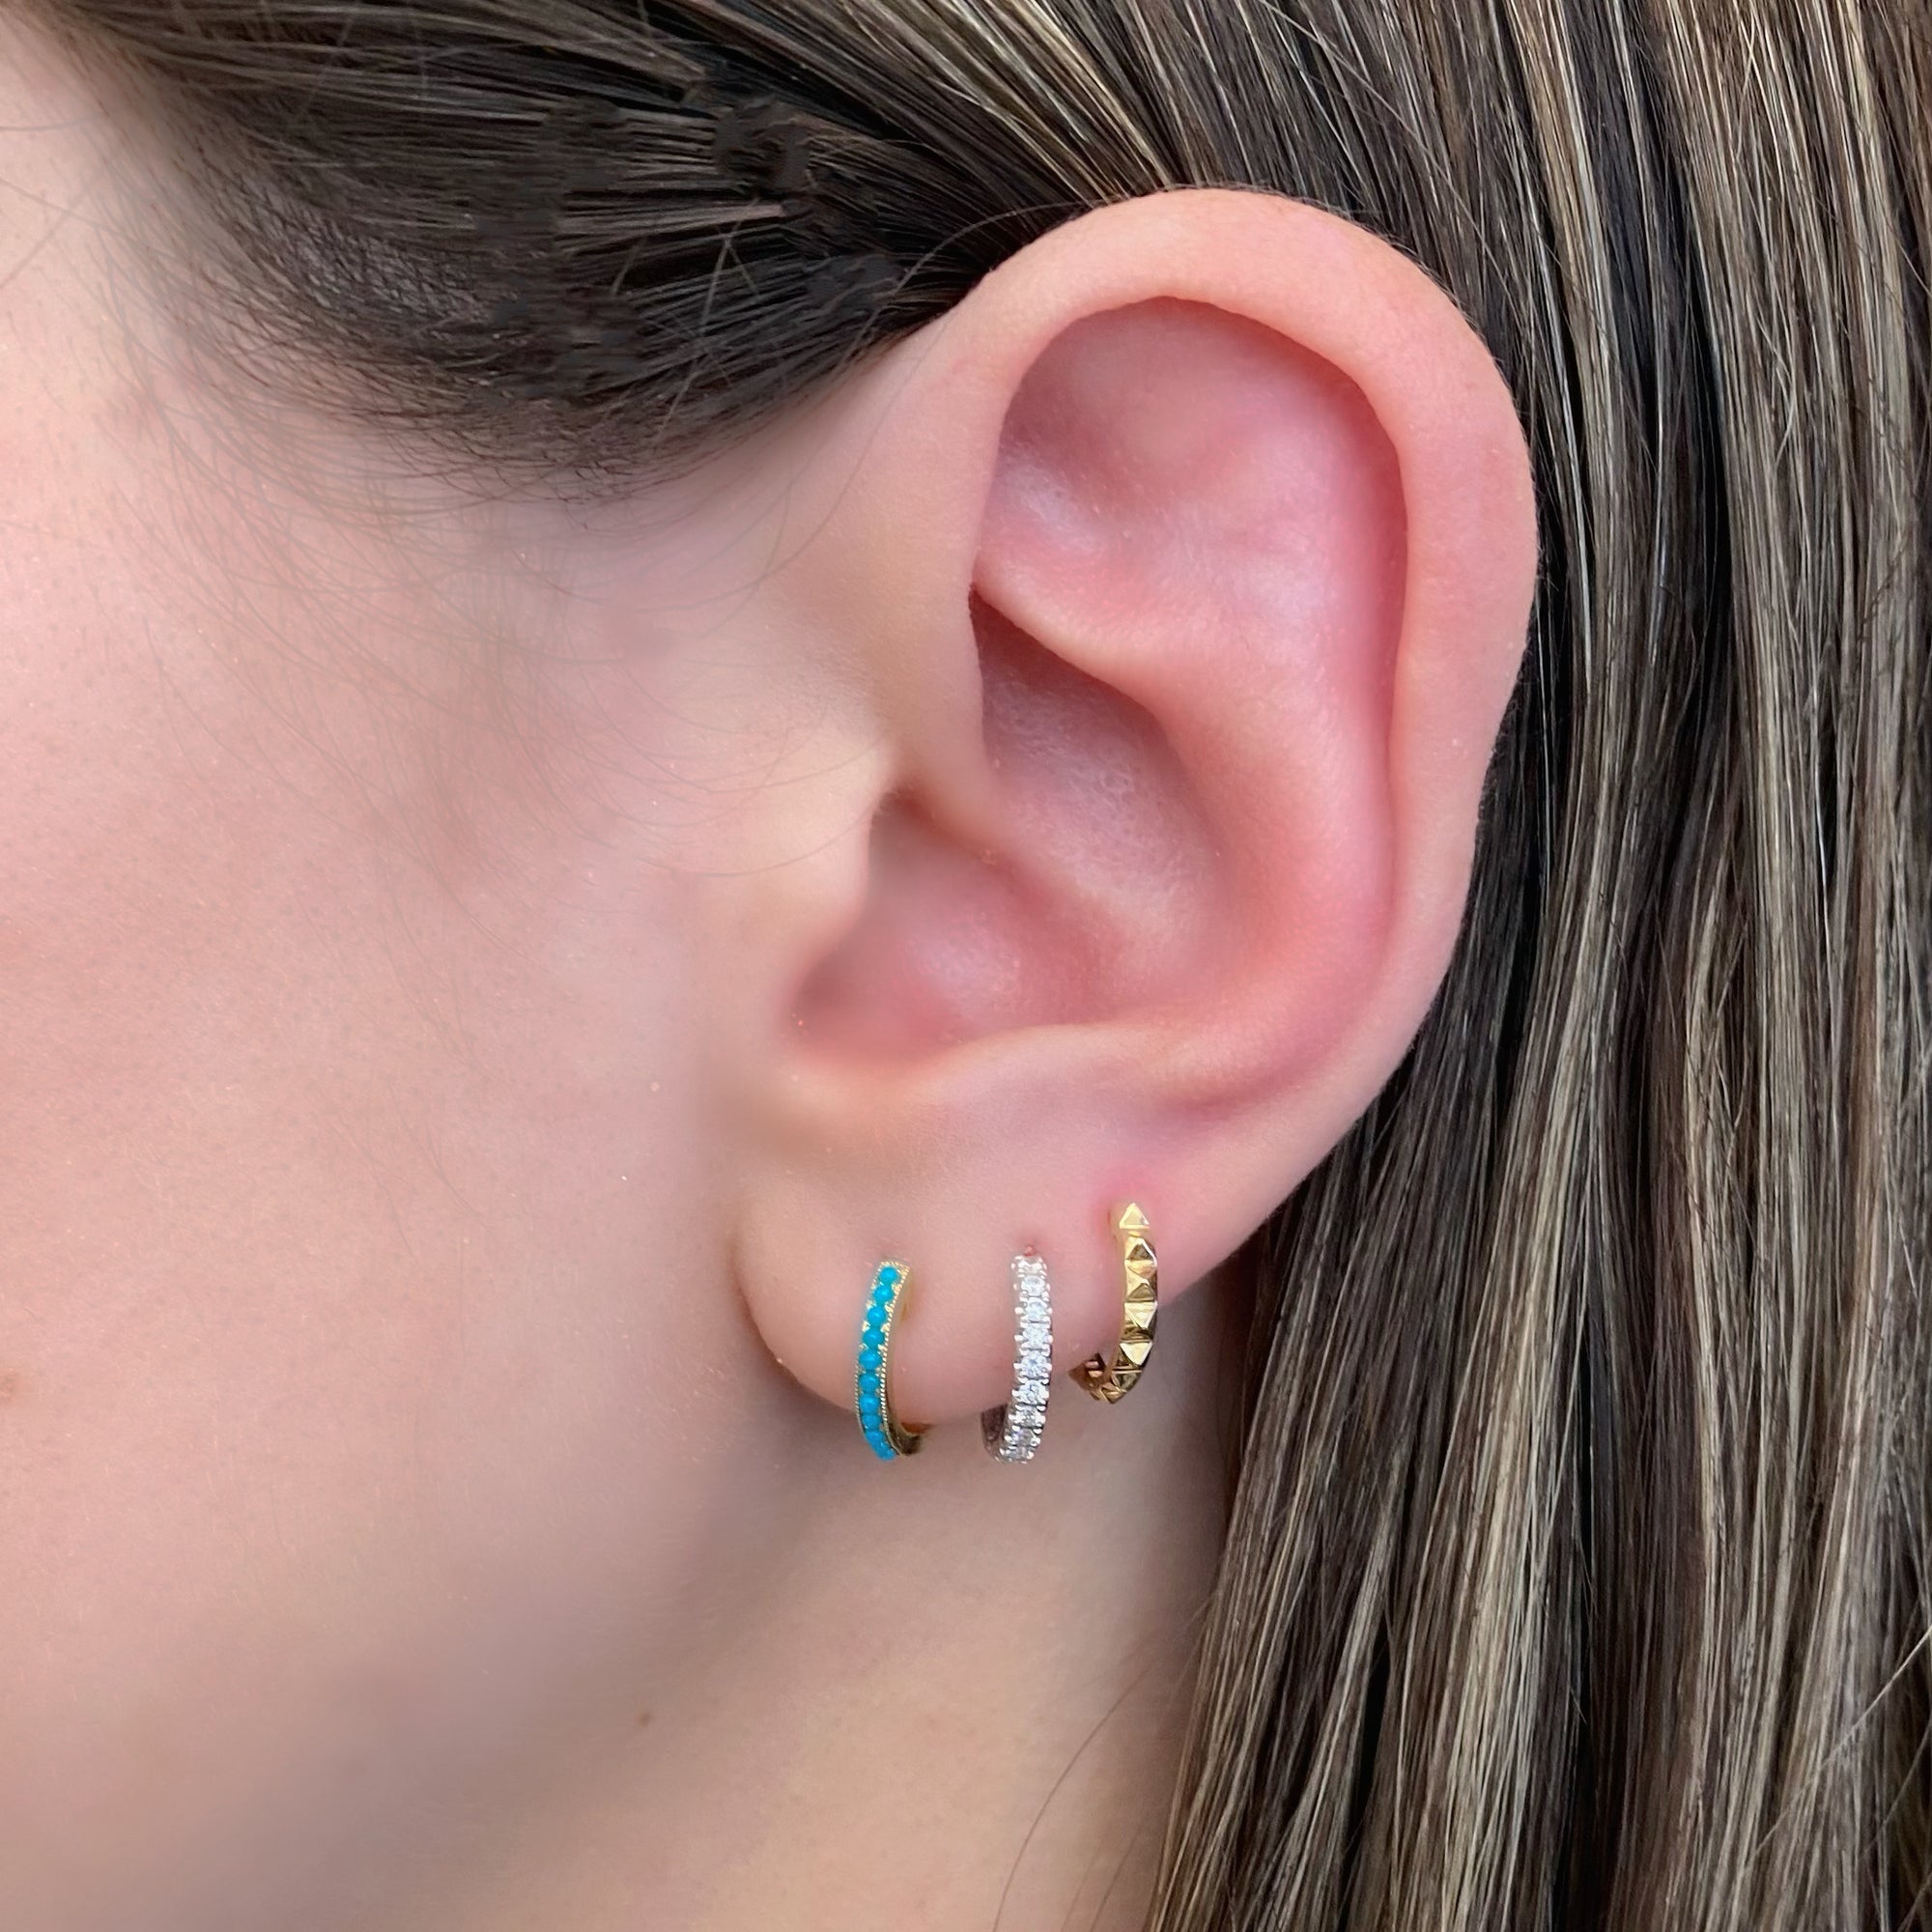 Turquoise Cabochon Huggie Earrings - 14K gold weighing 1.73 grams  - 22 turquoise cabochons totaling 0.23 carats